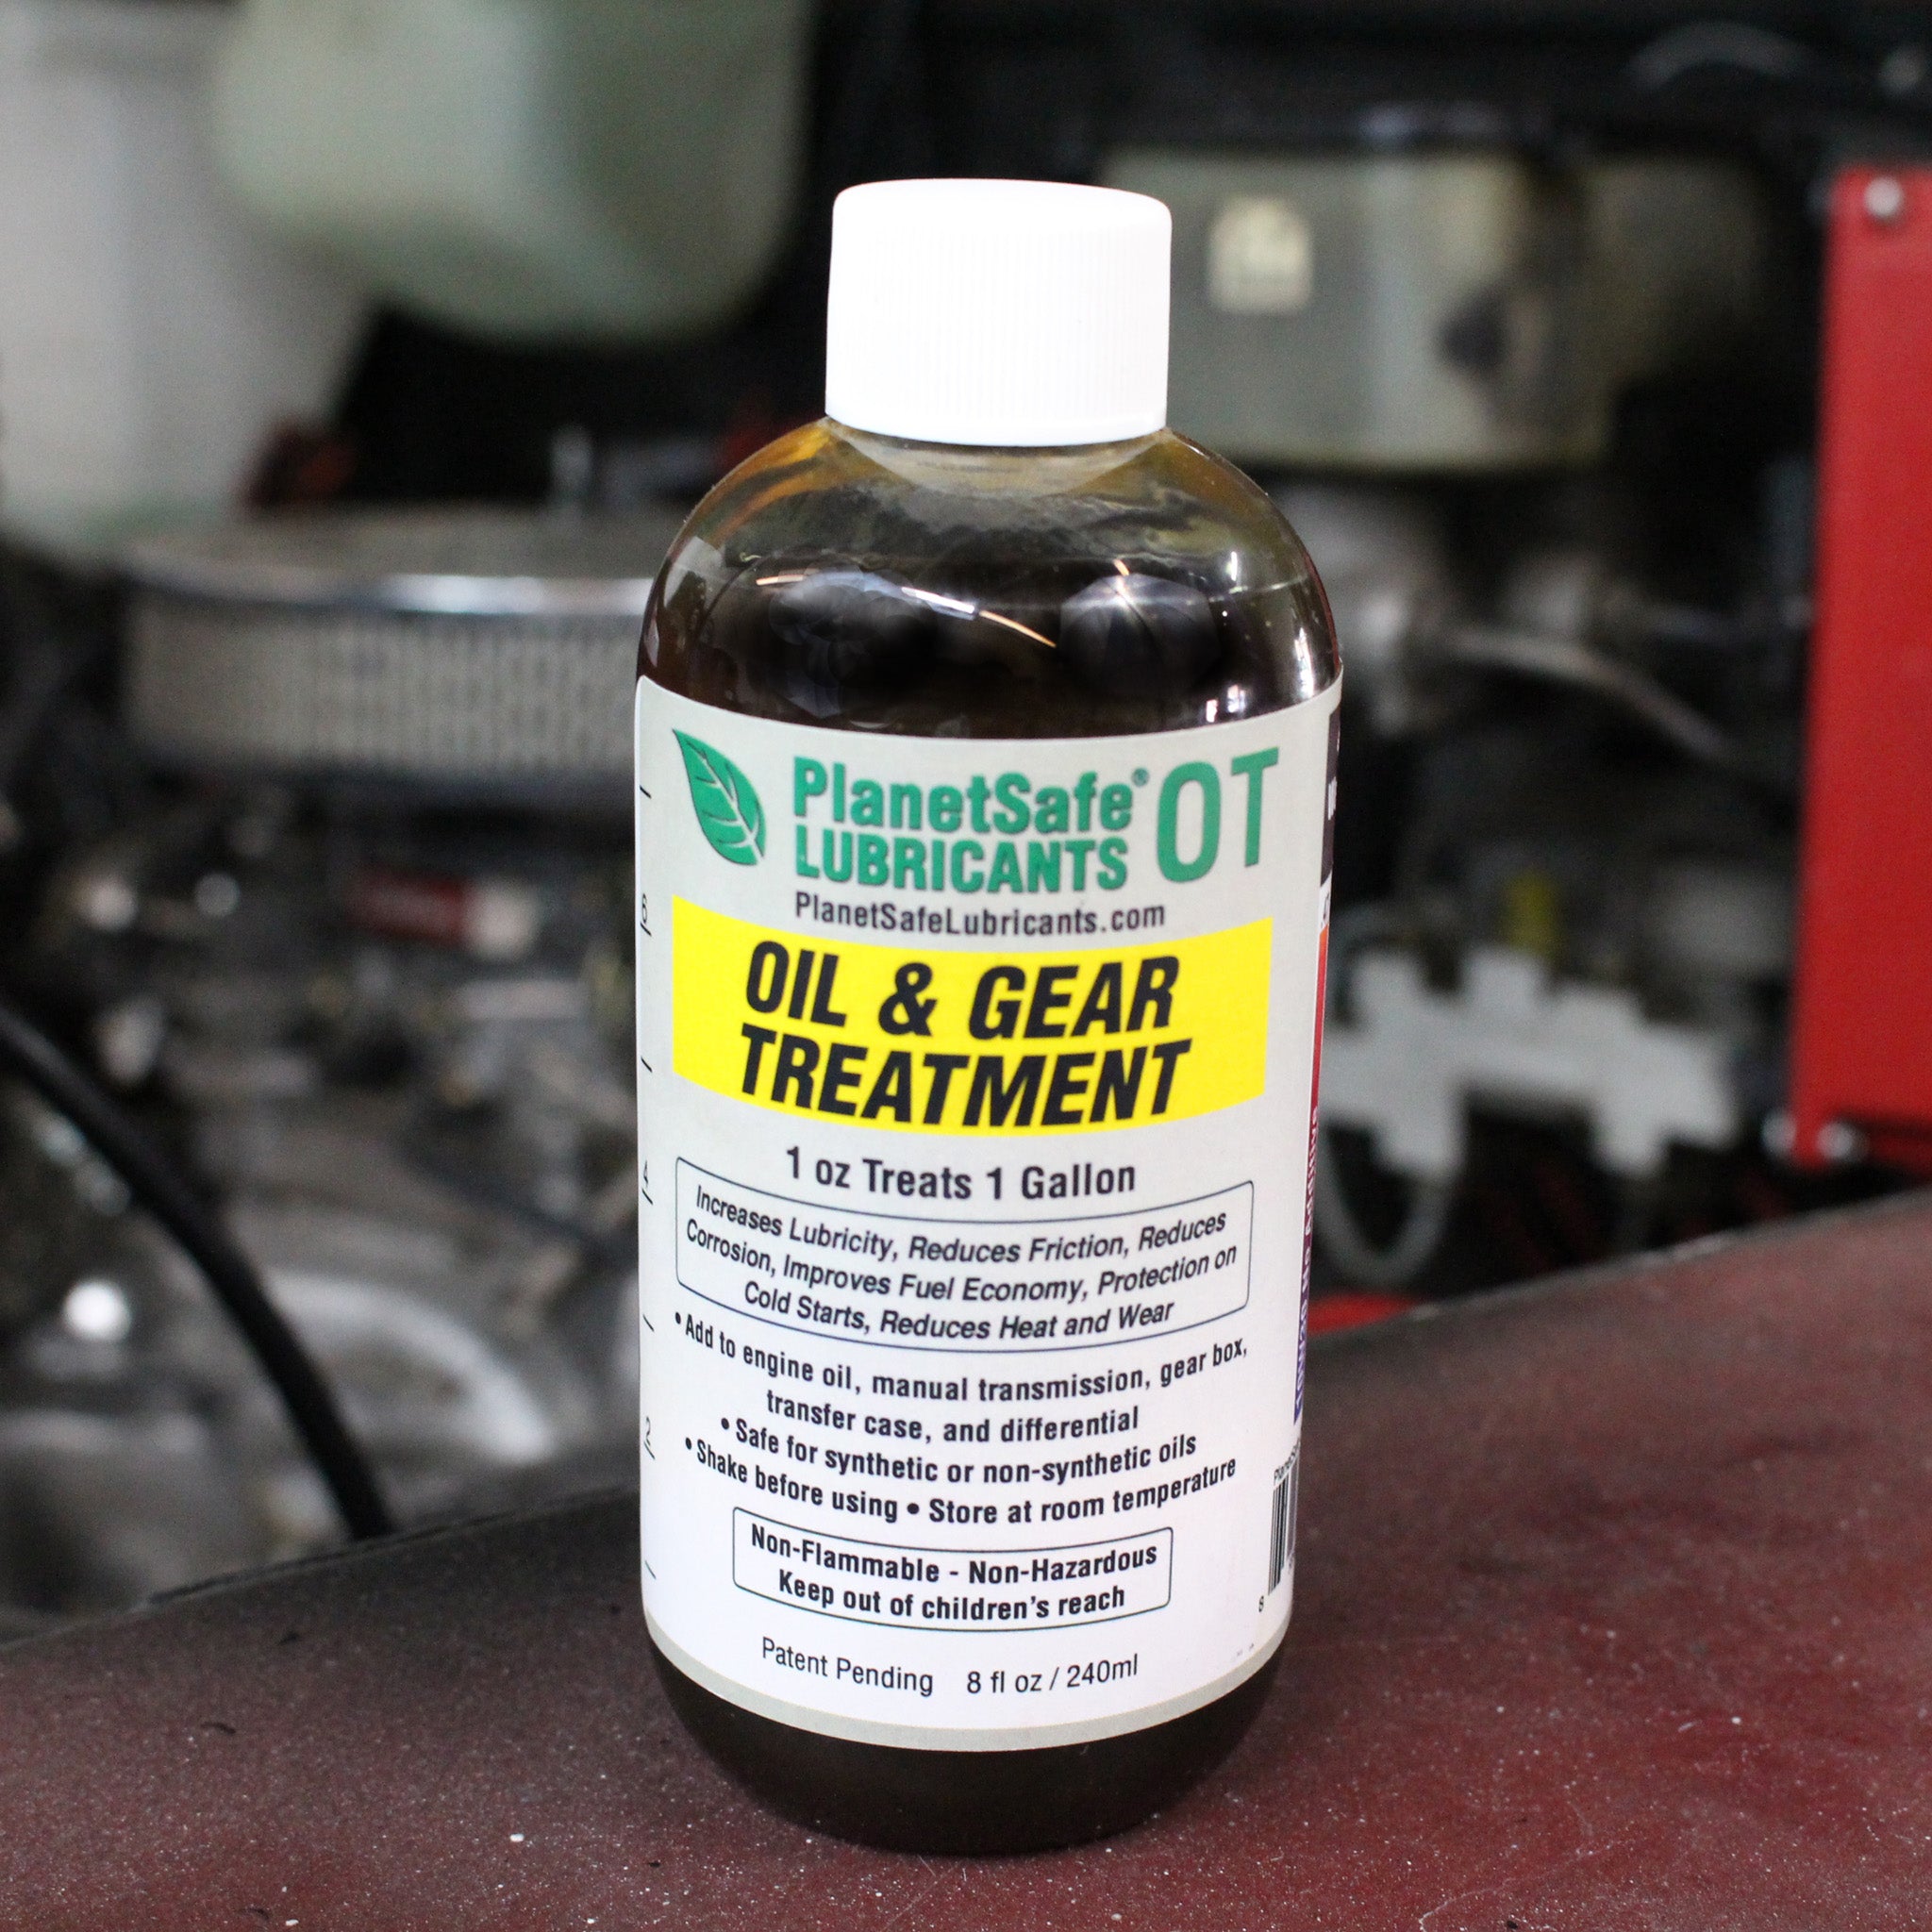 PlanetSafe Lubricants OT Oil Treatment 8oz -Oil and Gear Treatment - Worlds best - non-toxic - scientifically proven - oil treatment diesel engine